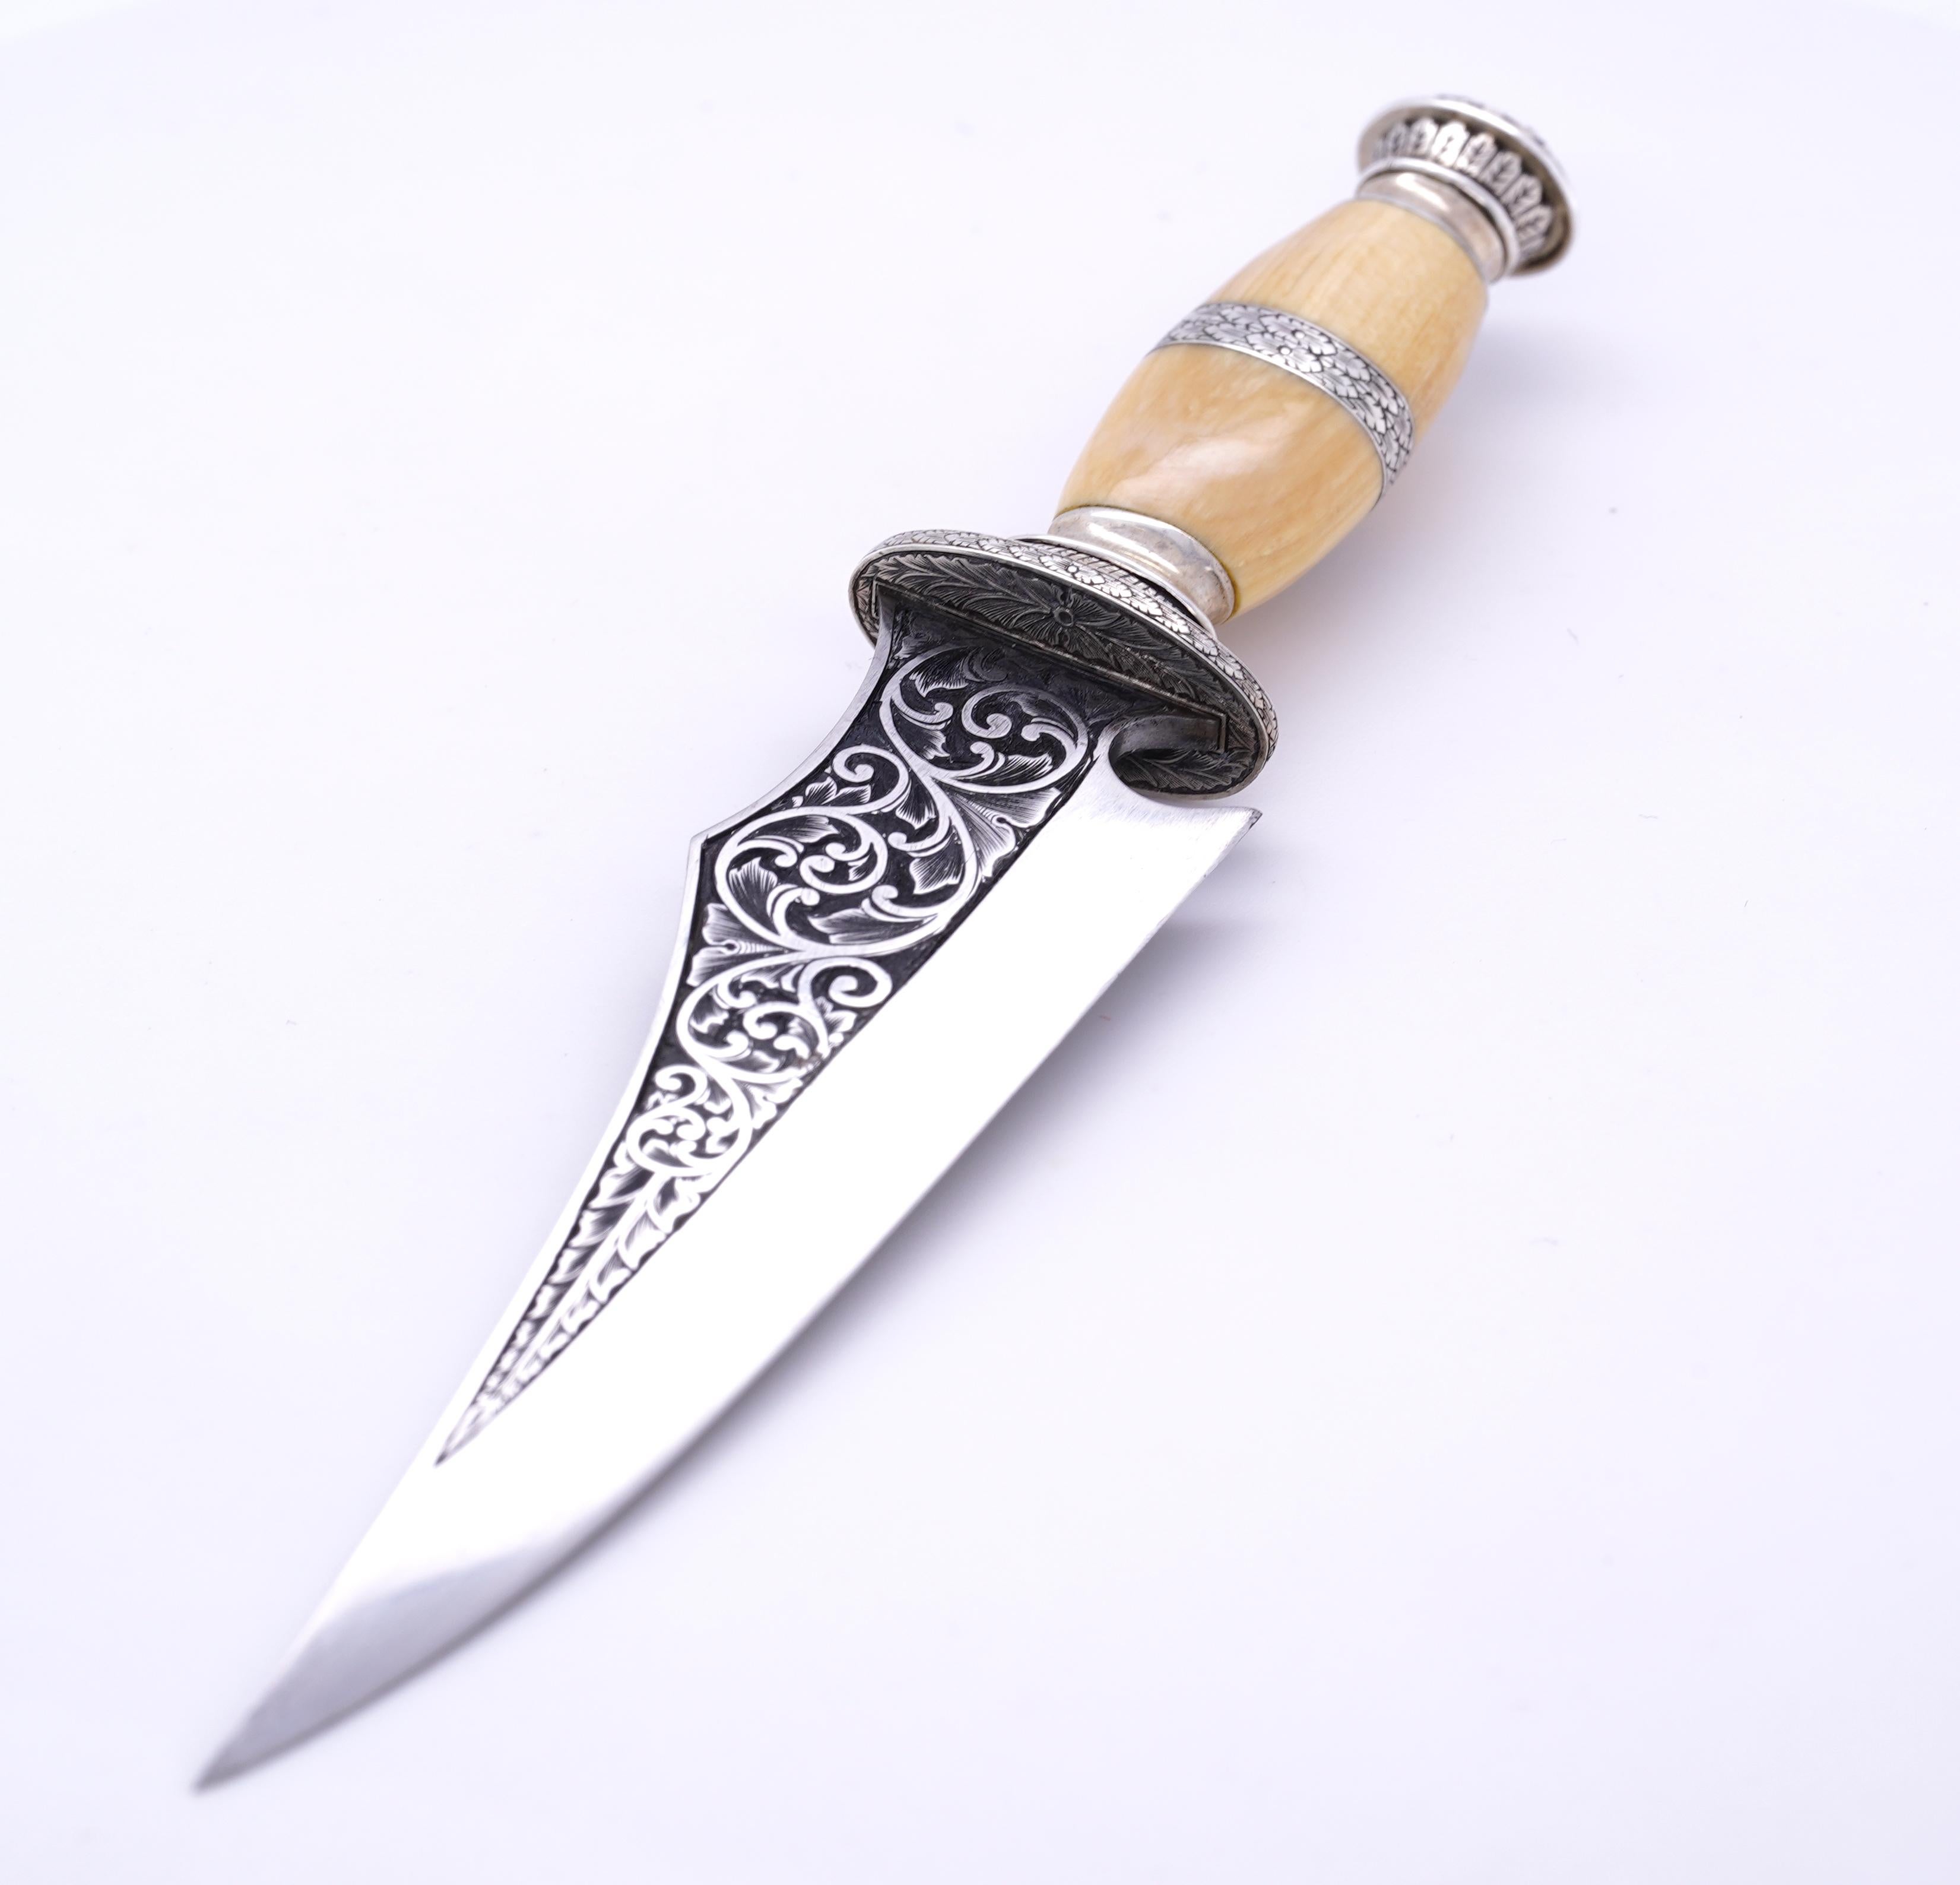 Mint, Miniature Bowie Knife with Sterling Silver Sheath by Jim Whitehead 5